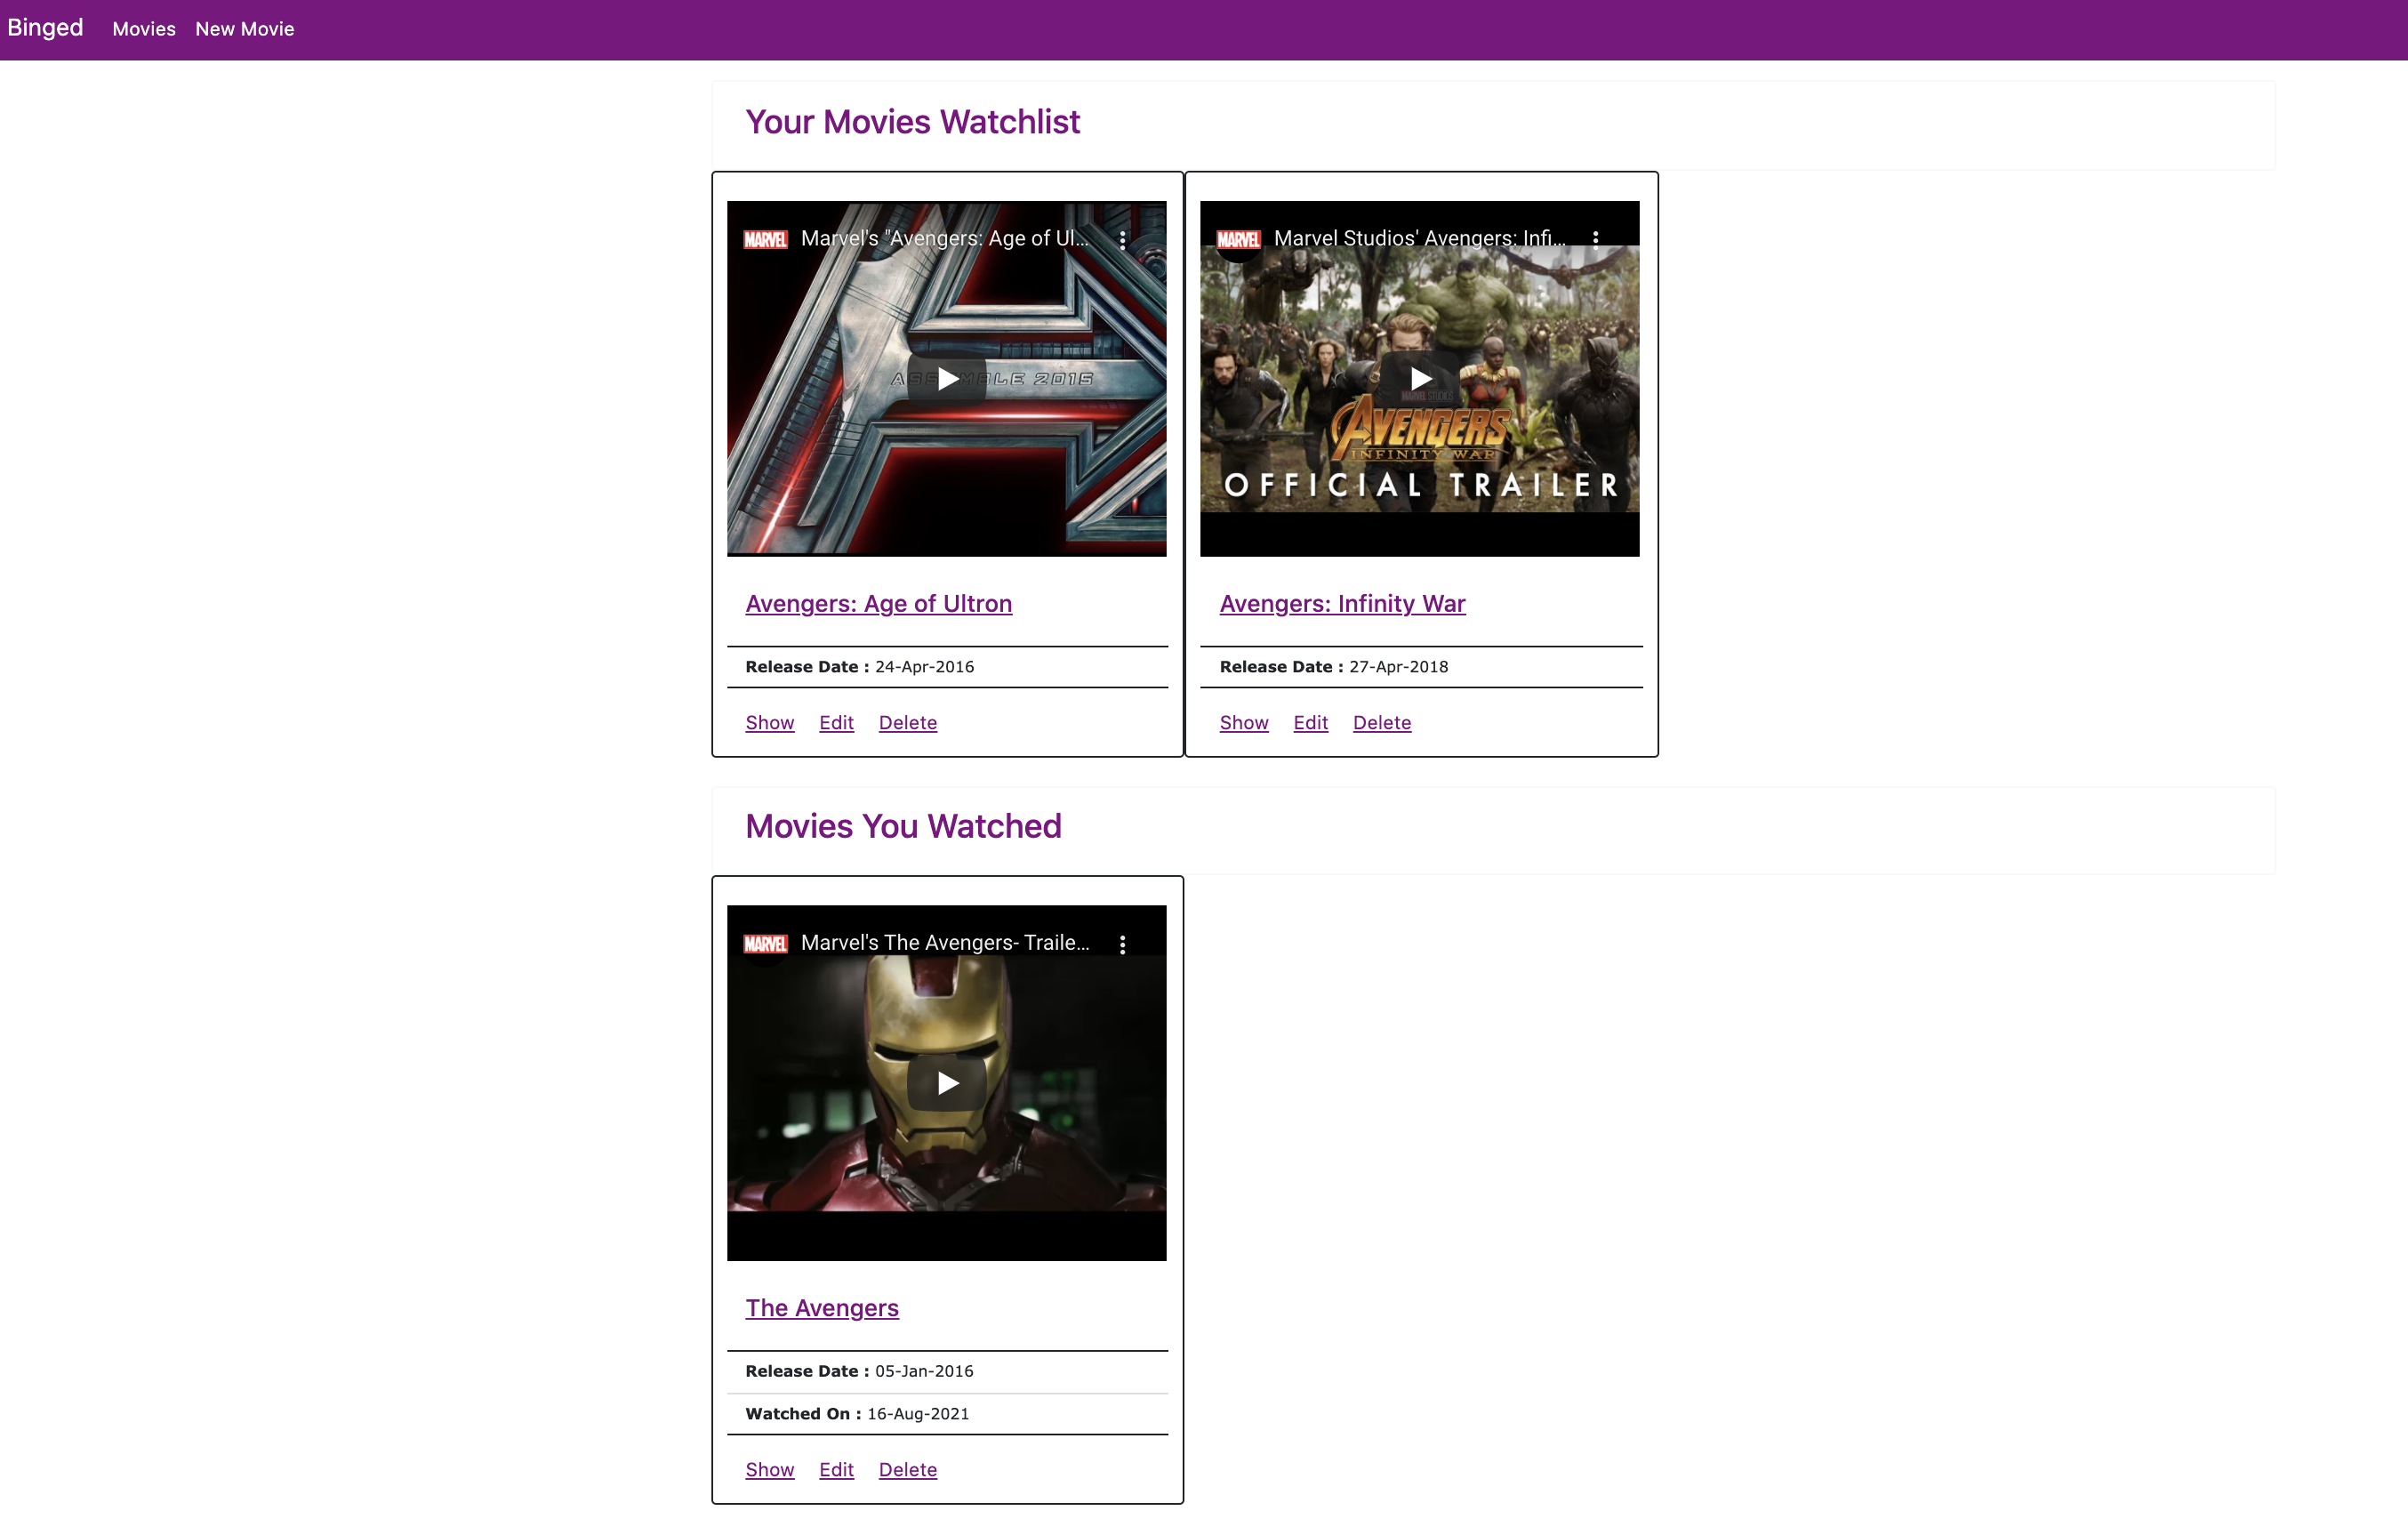 movie-tracker-home-page.png